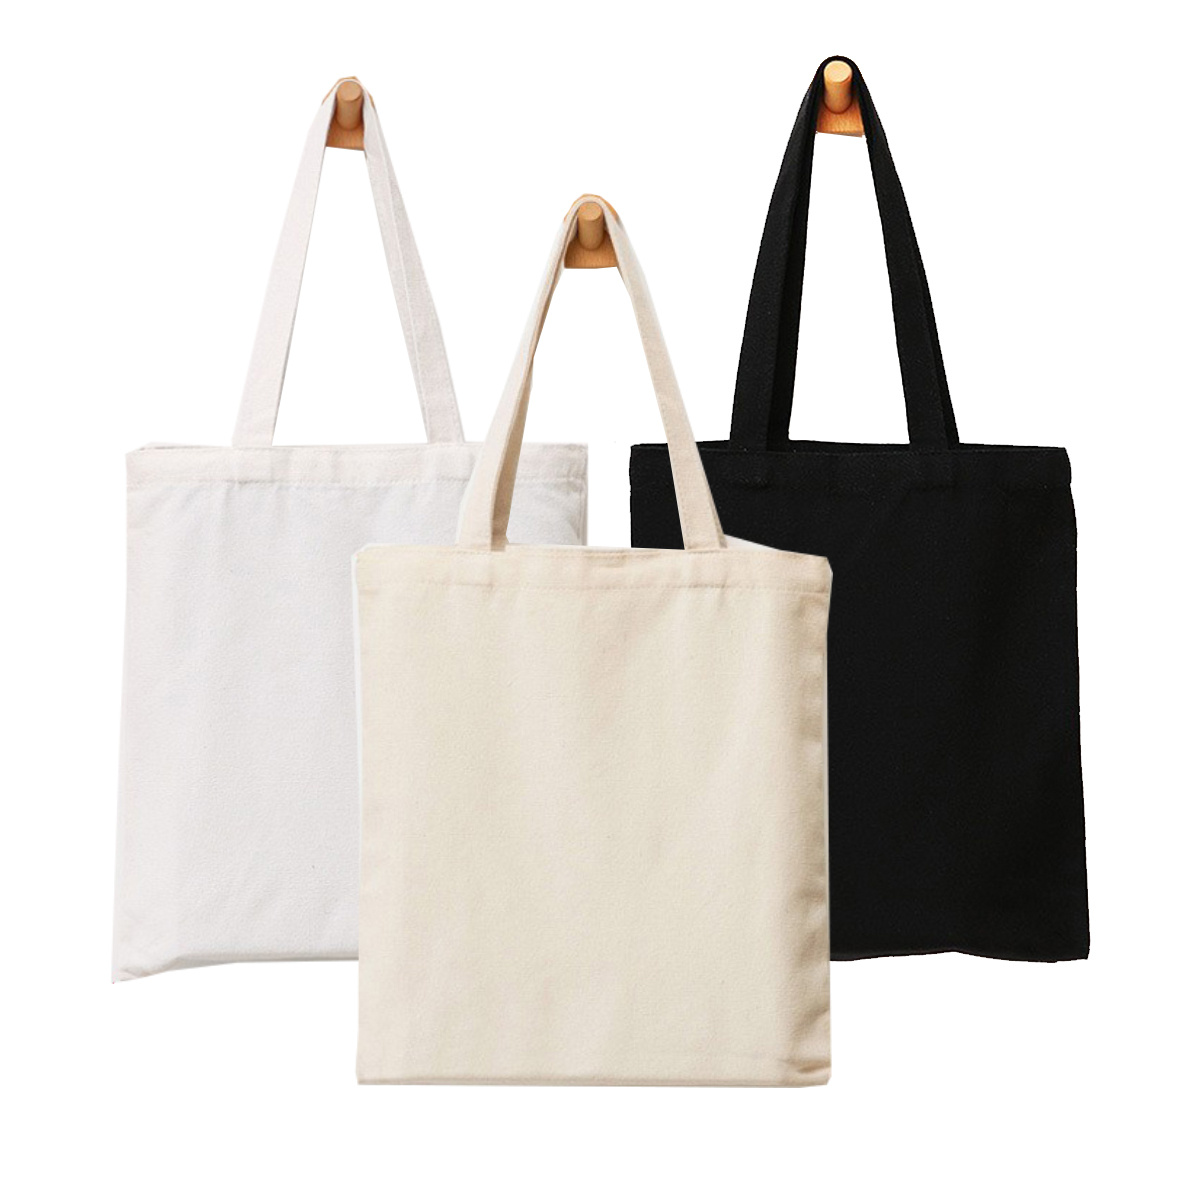 Draw blank Canvas Tote Bags. 2 | 5 | 6 | 12 | 24 |32 Pack Suitable for DIY,  foldable, craft & gift bags heavy duty, washable